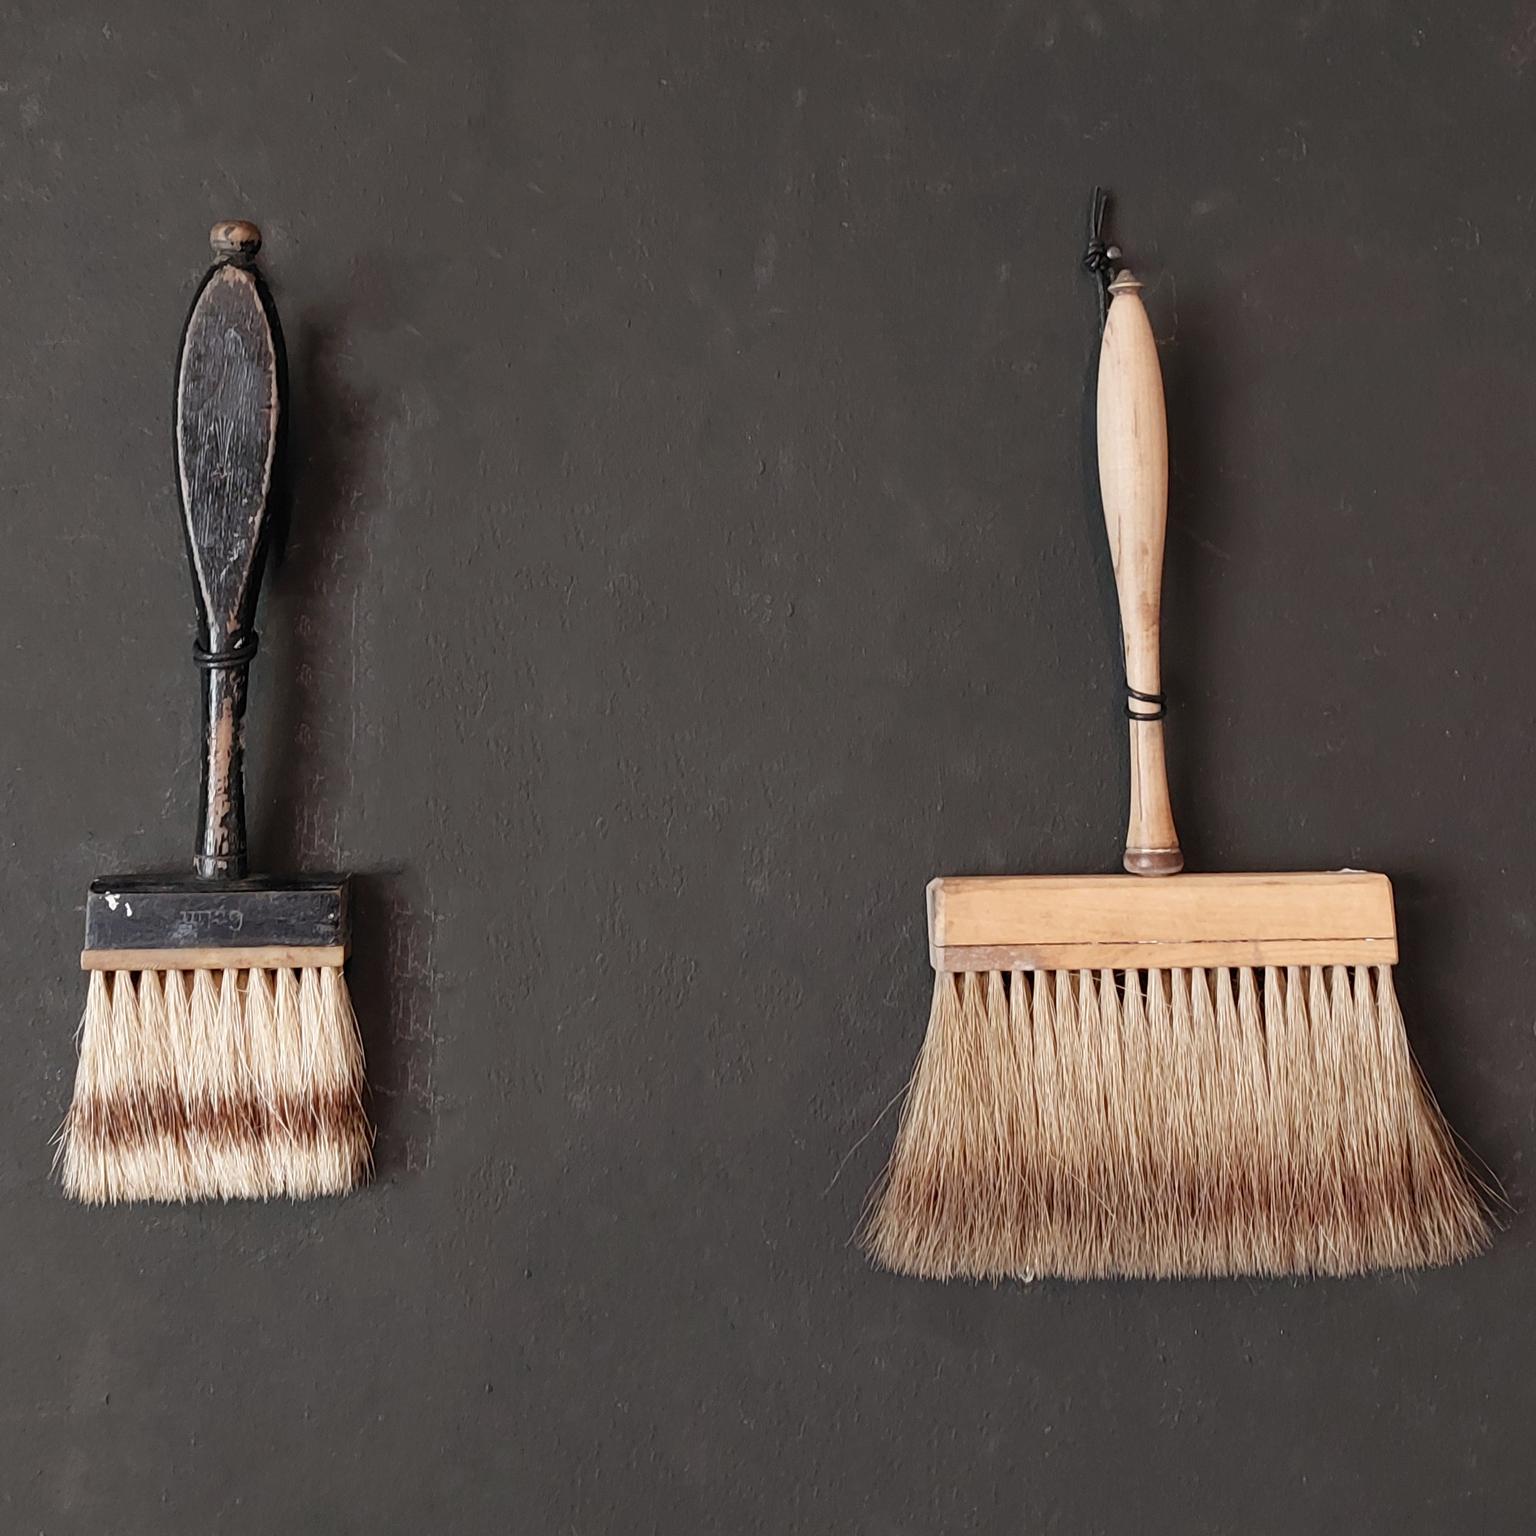 Decorative set consisting of two antique badger hair paint brushes. This is the real deal, each of these craftsmanship handmade brushes is an art piece on its own because you can see they where used.
The smallest brush actually has bone ferrules and